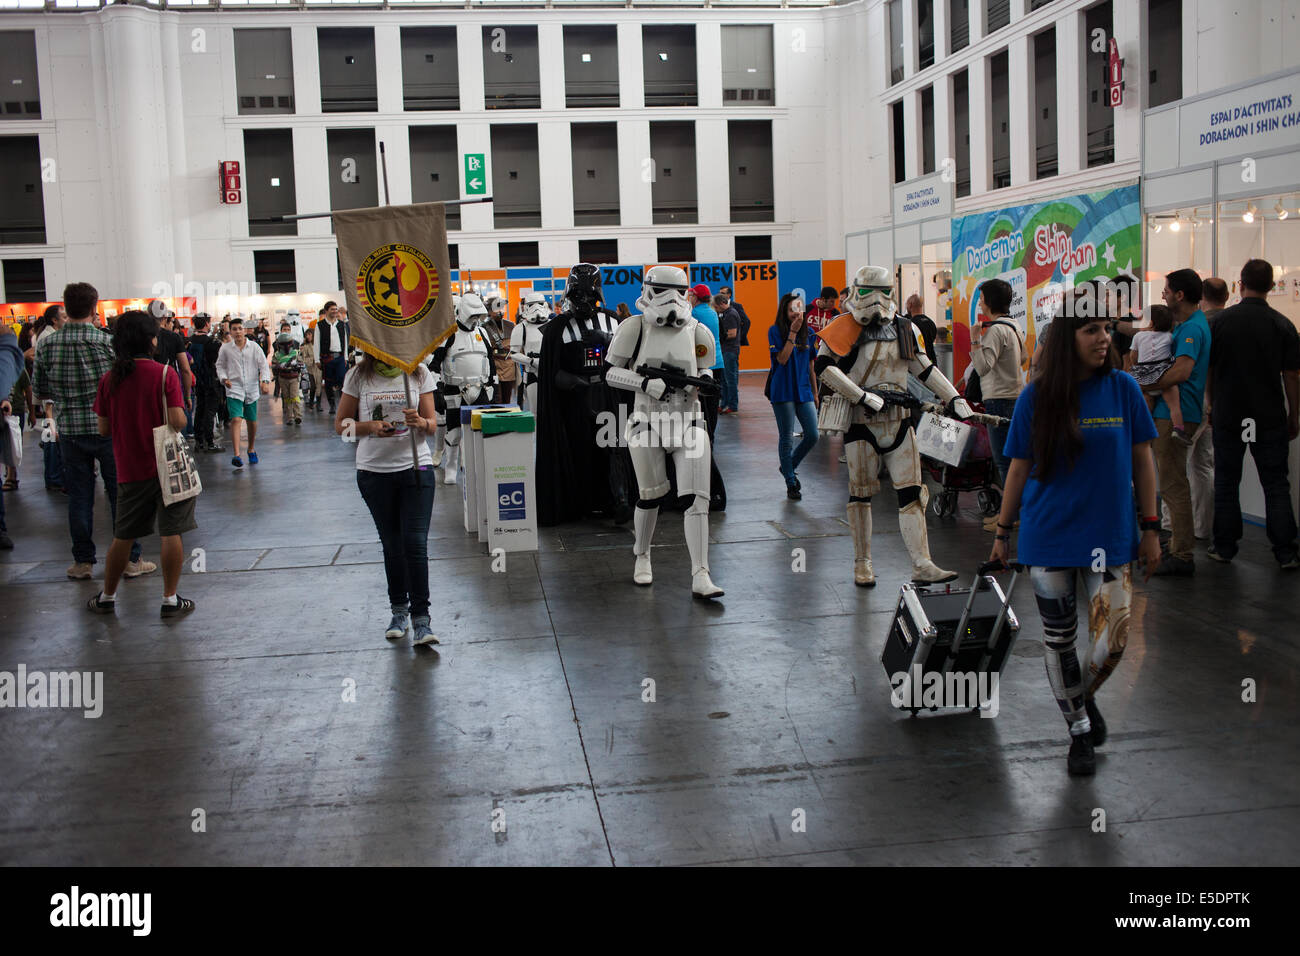 Darth Vader with Stormtroopers at Comic Fair on May 17 in Barcelona, Catalonia, Spain. Stock Photo